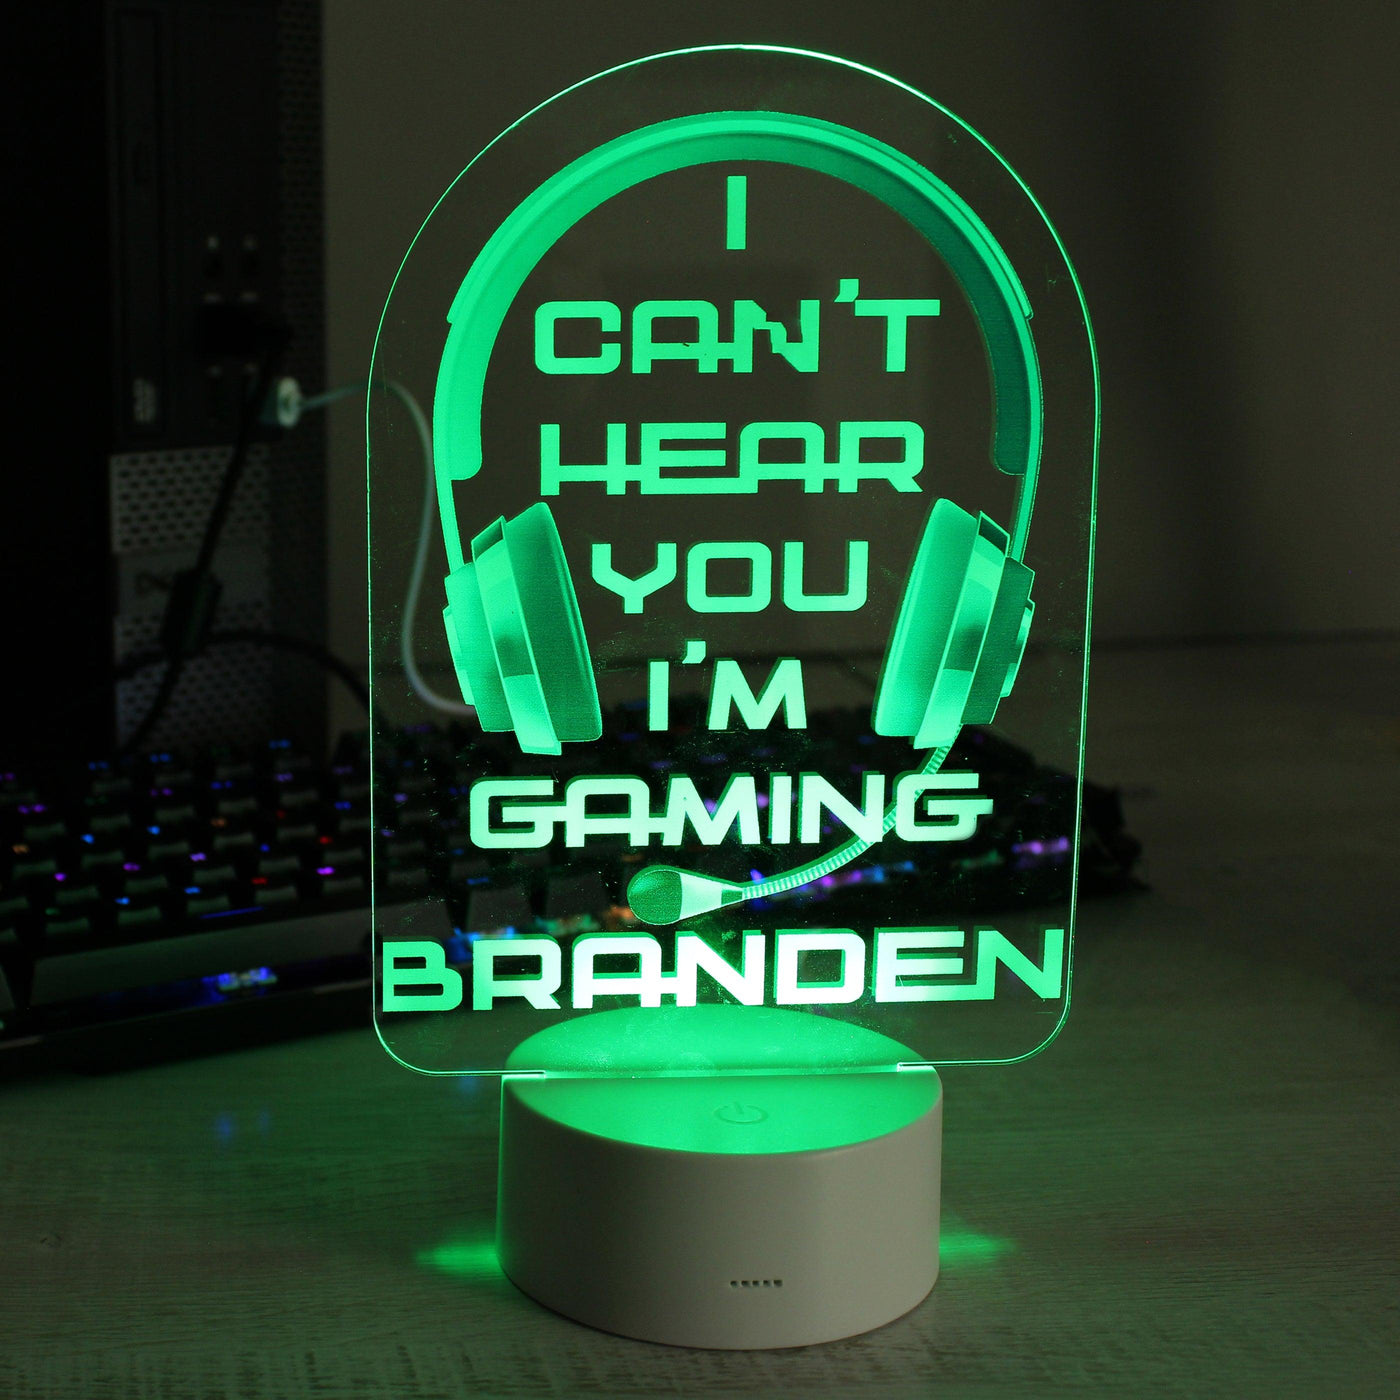 Personalised Blue Gaming LED Colour Changing Night Light - Shop Personalised Gifts